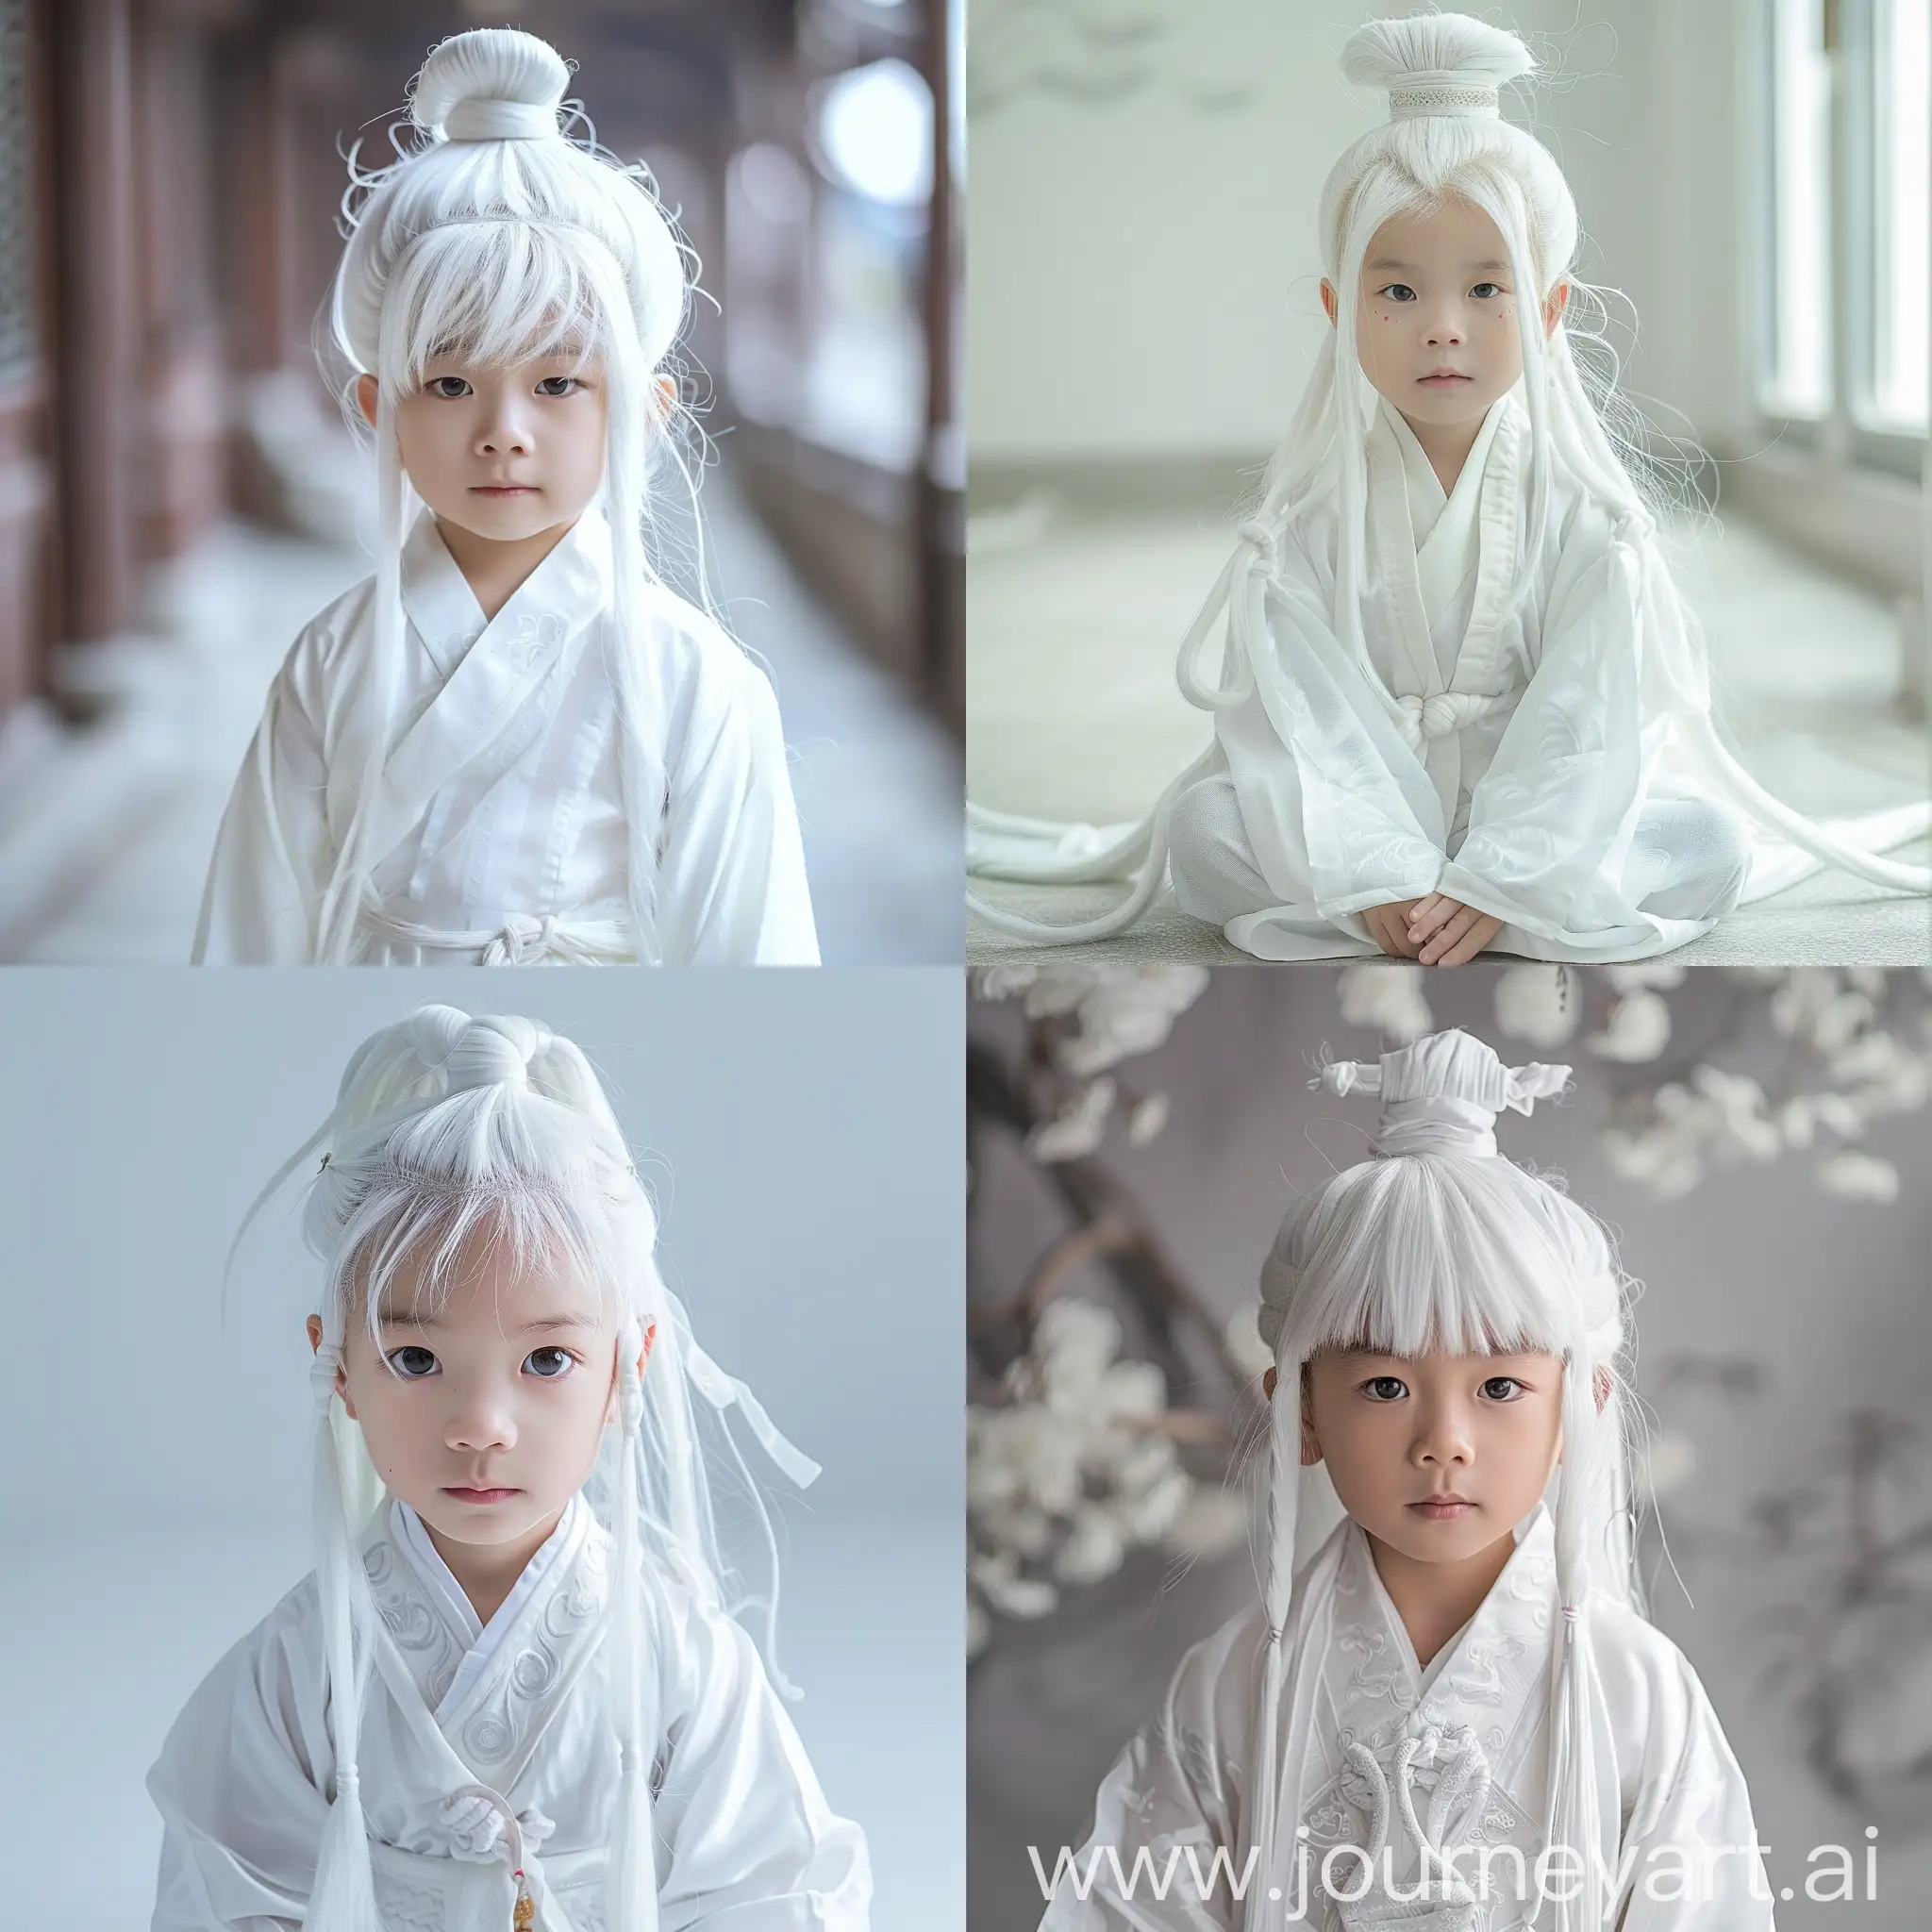 Charming-Little-Boy-in-Traditional-White-Costume